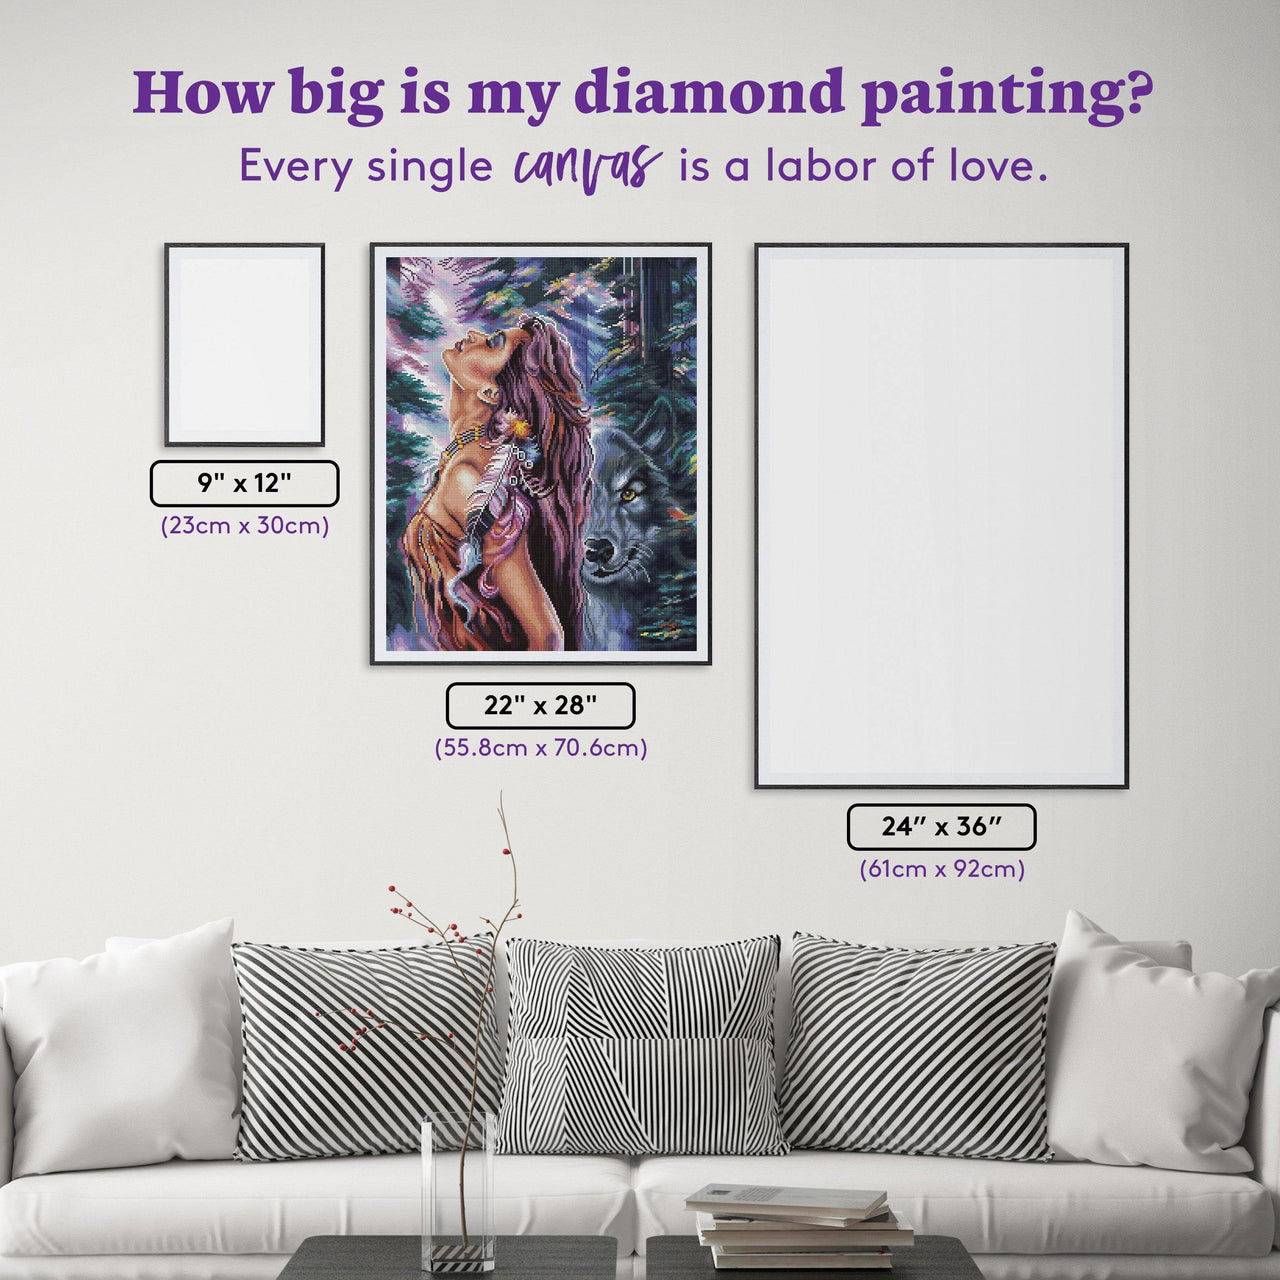 Diamond Painting Drawn to the Light 22" x 28" (55.8cm x 70.6cm) / Round With 75 Colors Including 4 ABs / 50,147